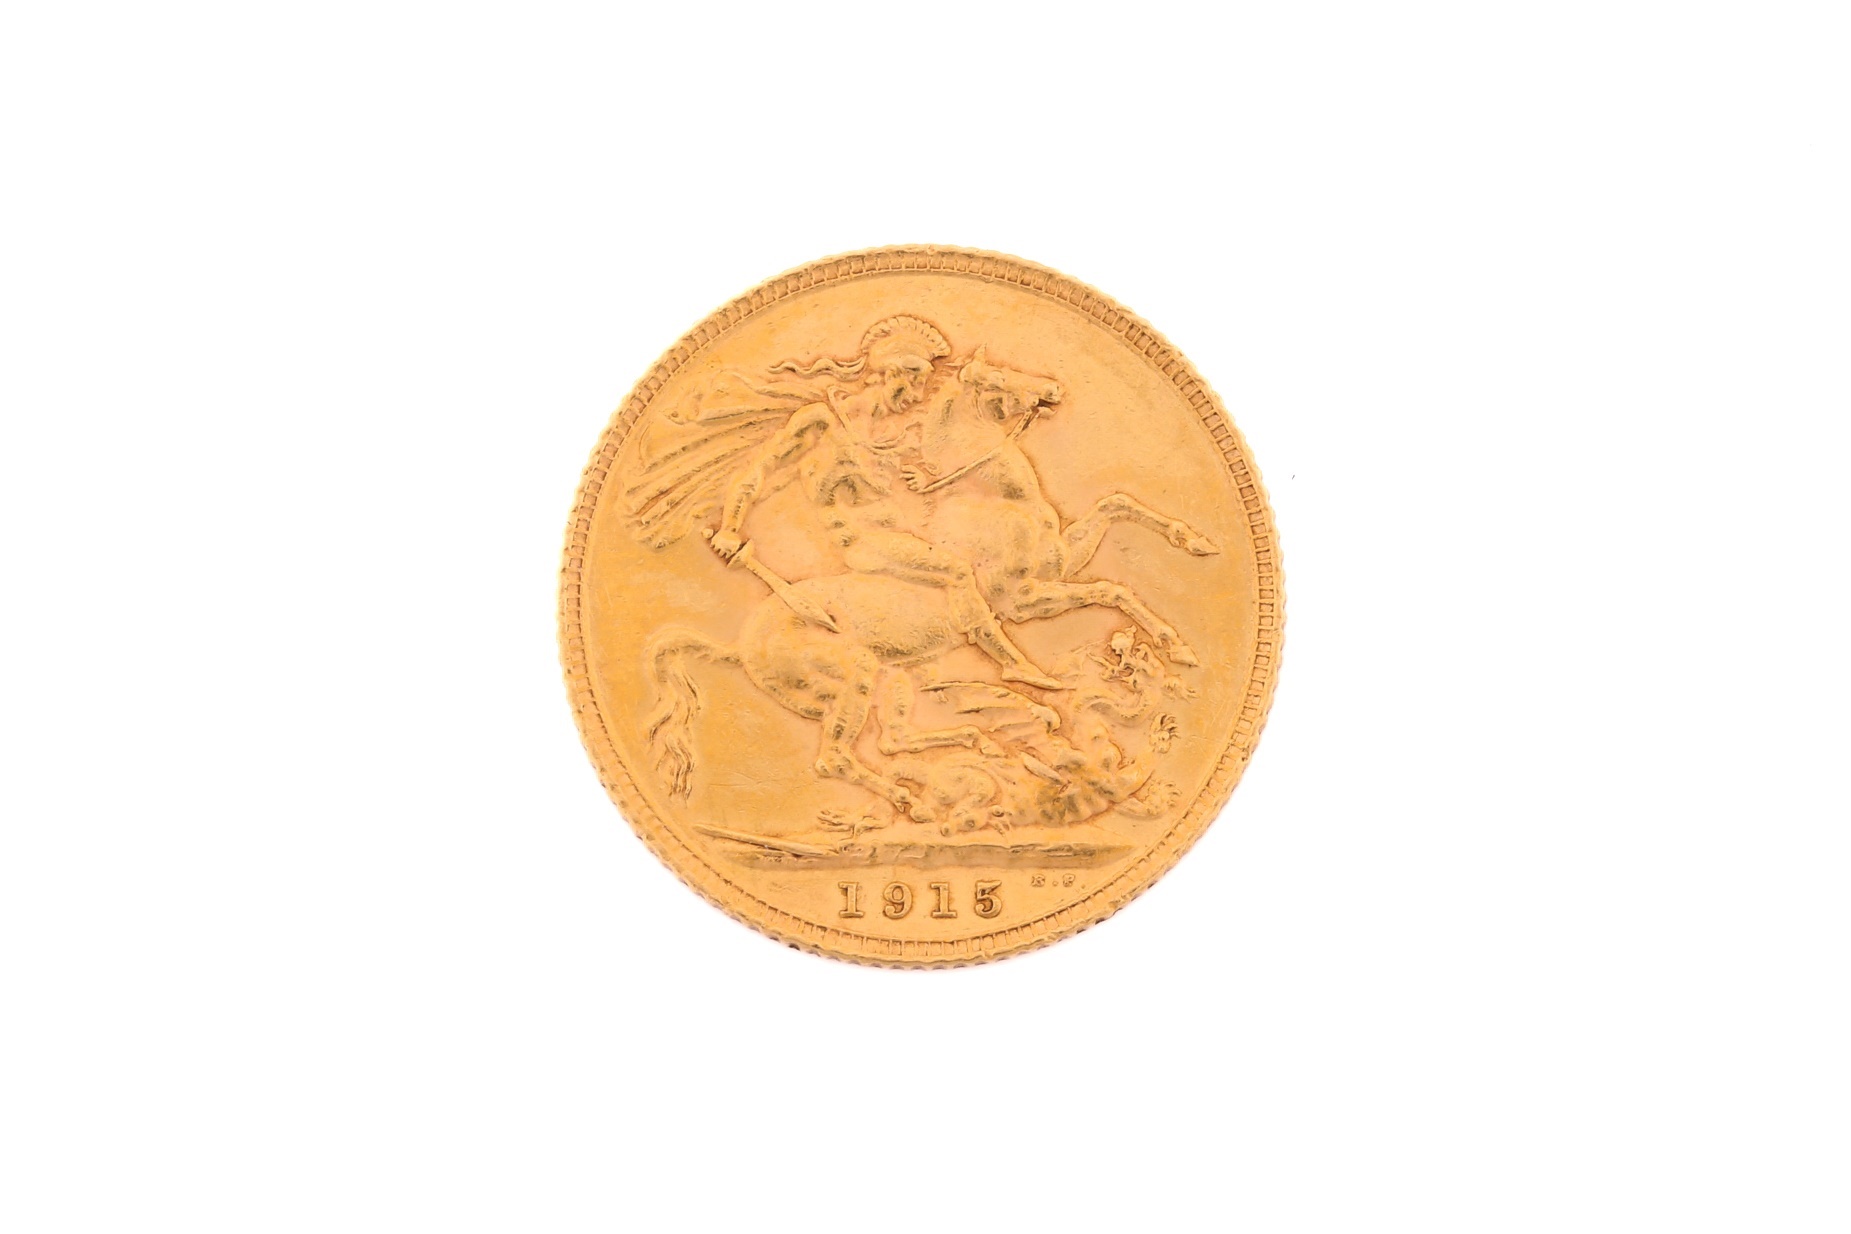 A George V 1915 gold sovereign